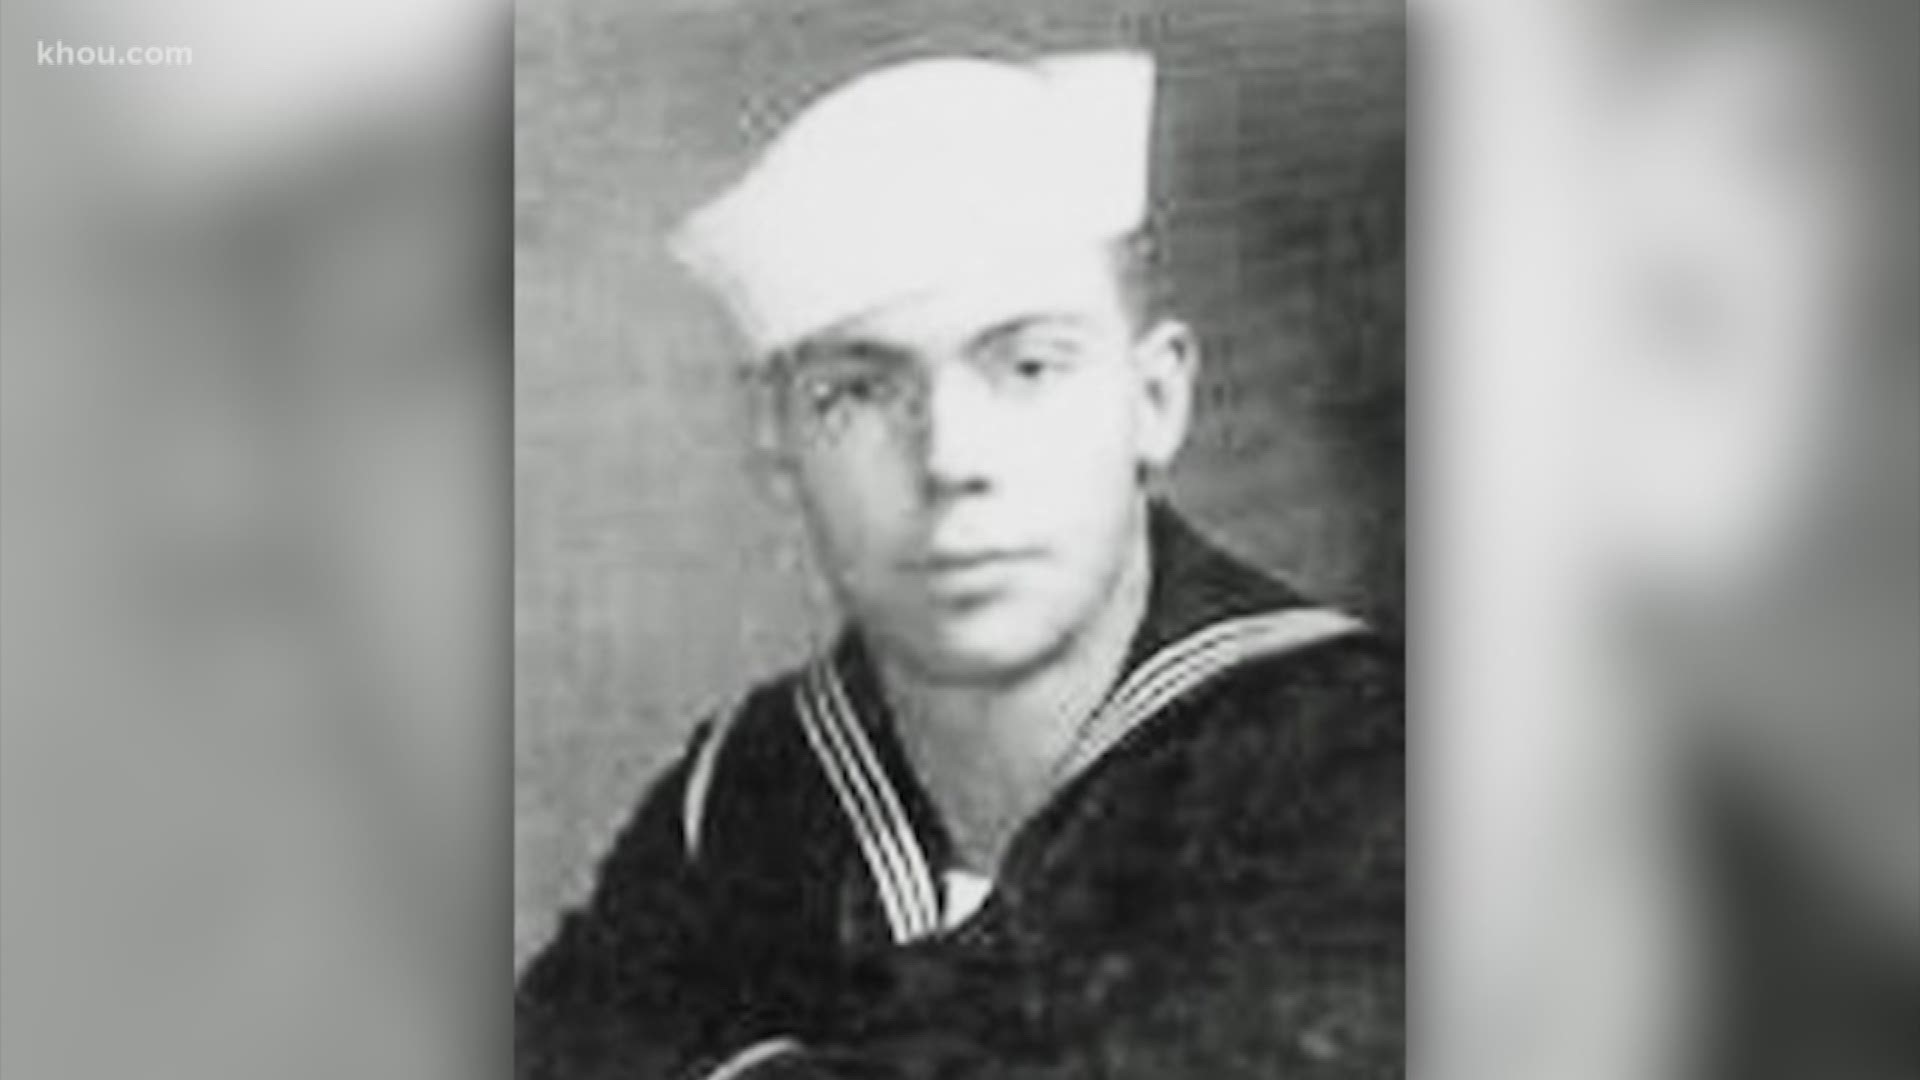 A sailor who died 78 years ago in the attack on Pearl Harbor has just been identified. He was 19 years old when he died and was from League City.